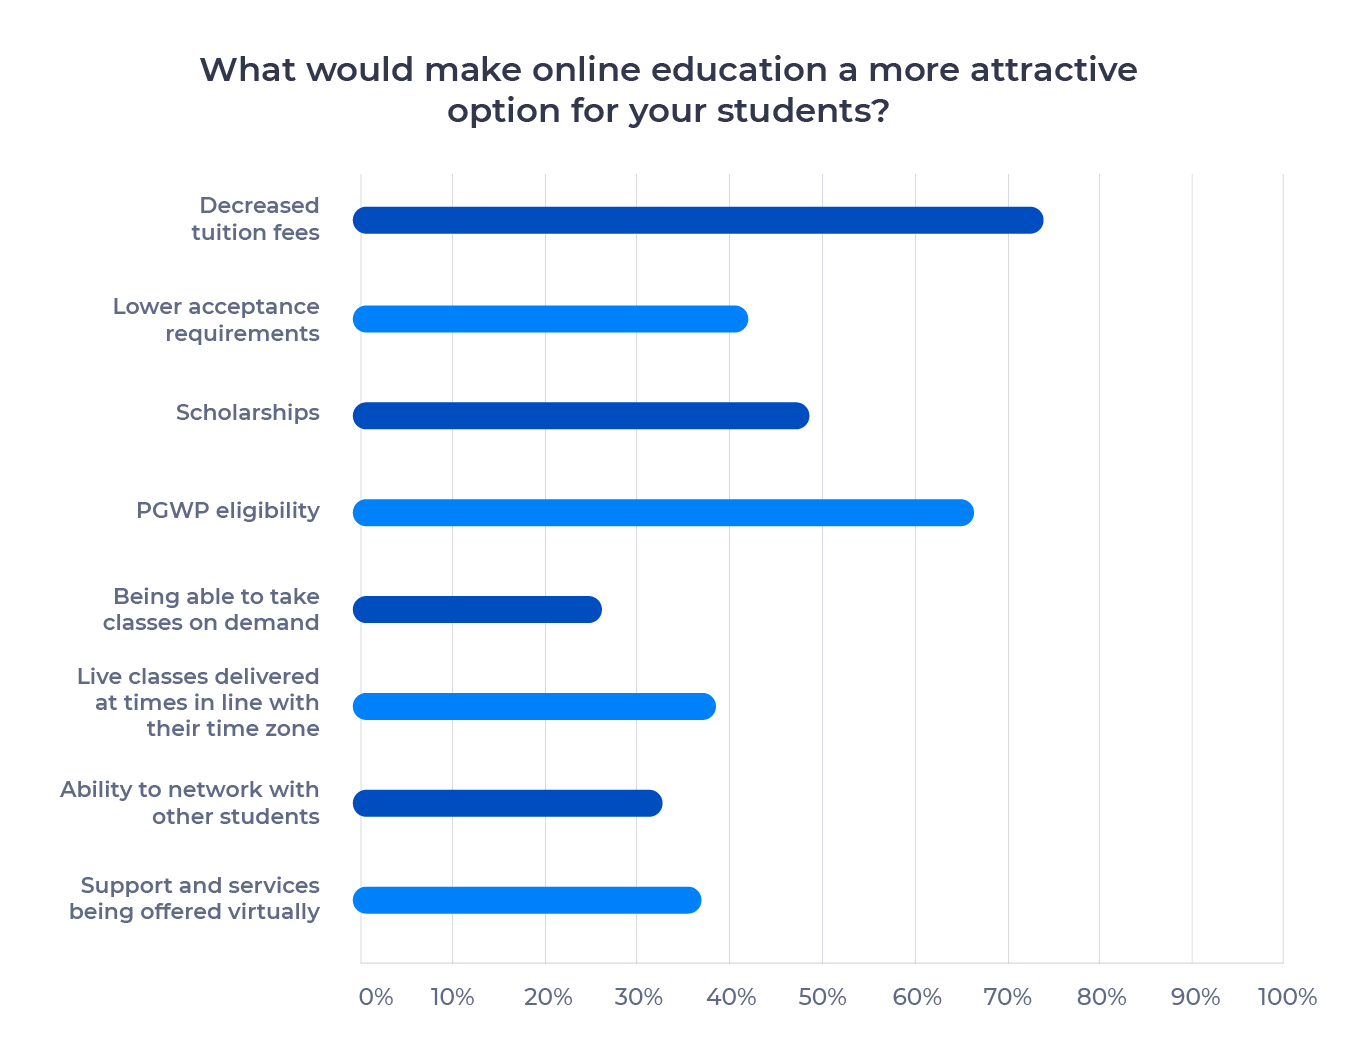 Bar chart showing ways to make online education more attractive for international students. Examined in detail below.